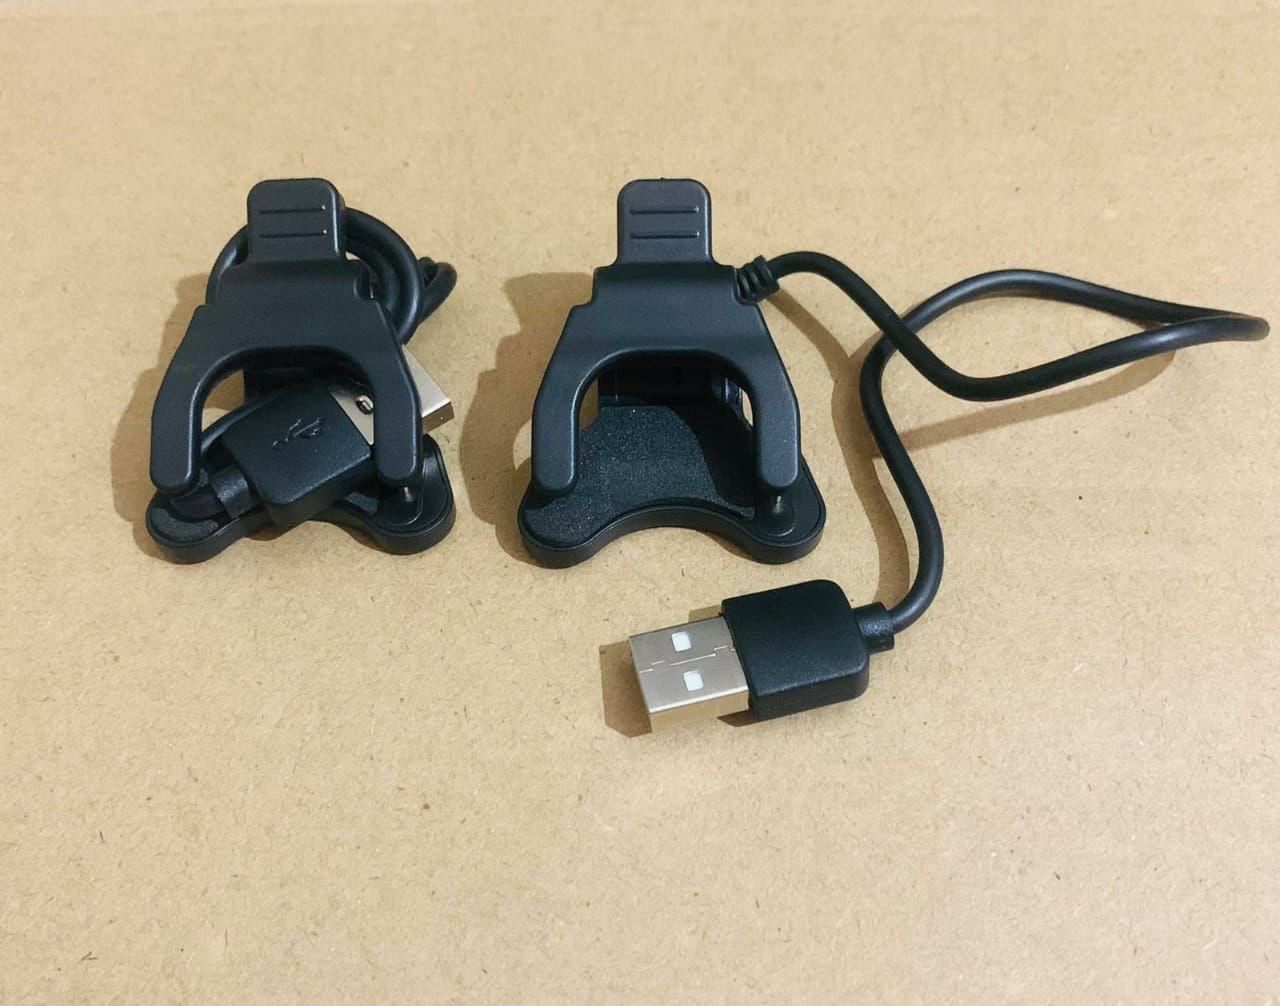 Extra USB Dysrtike Cable Charger – Drystrike